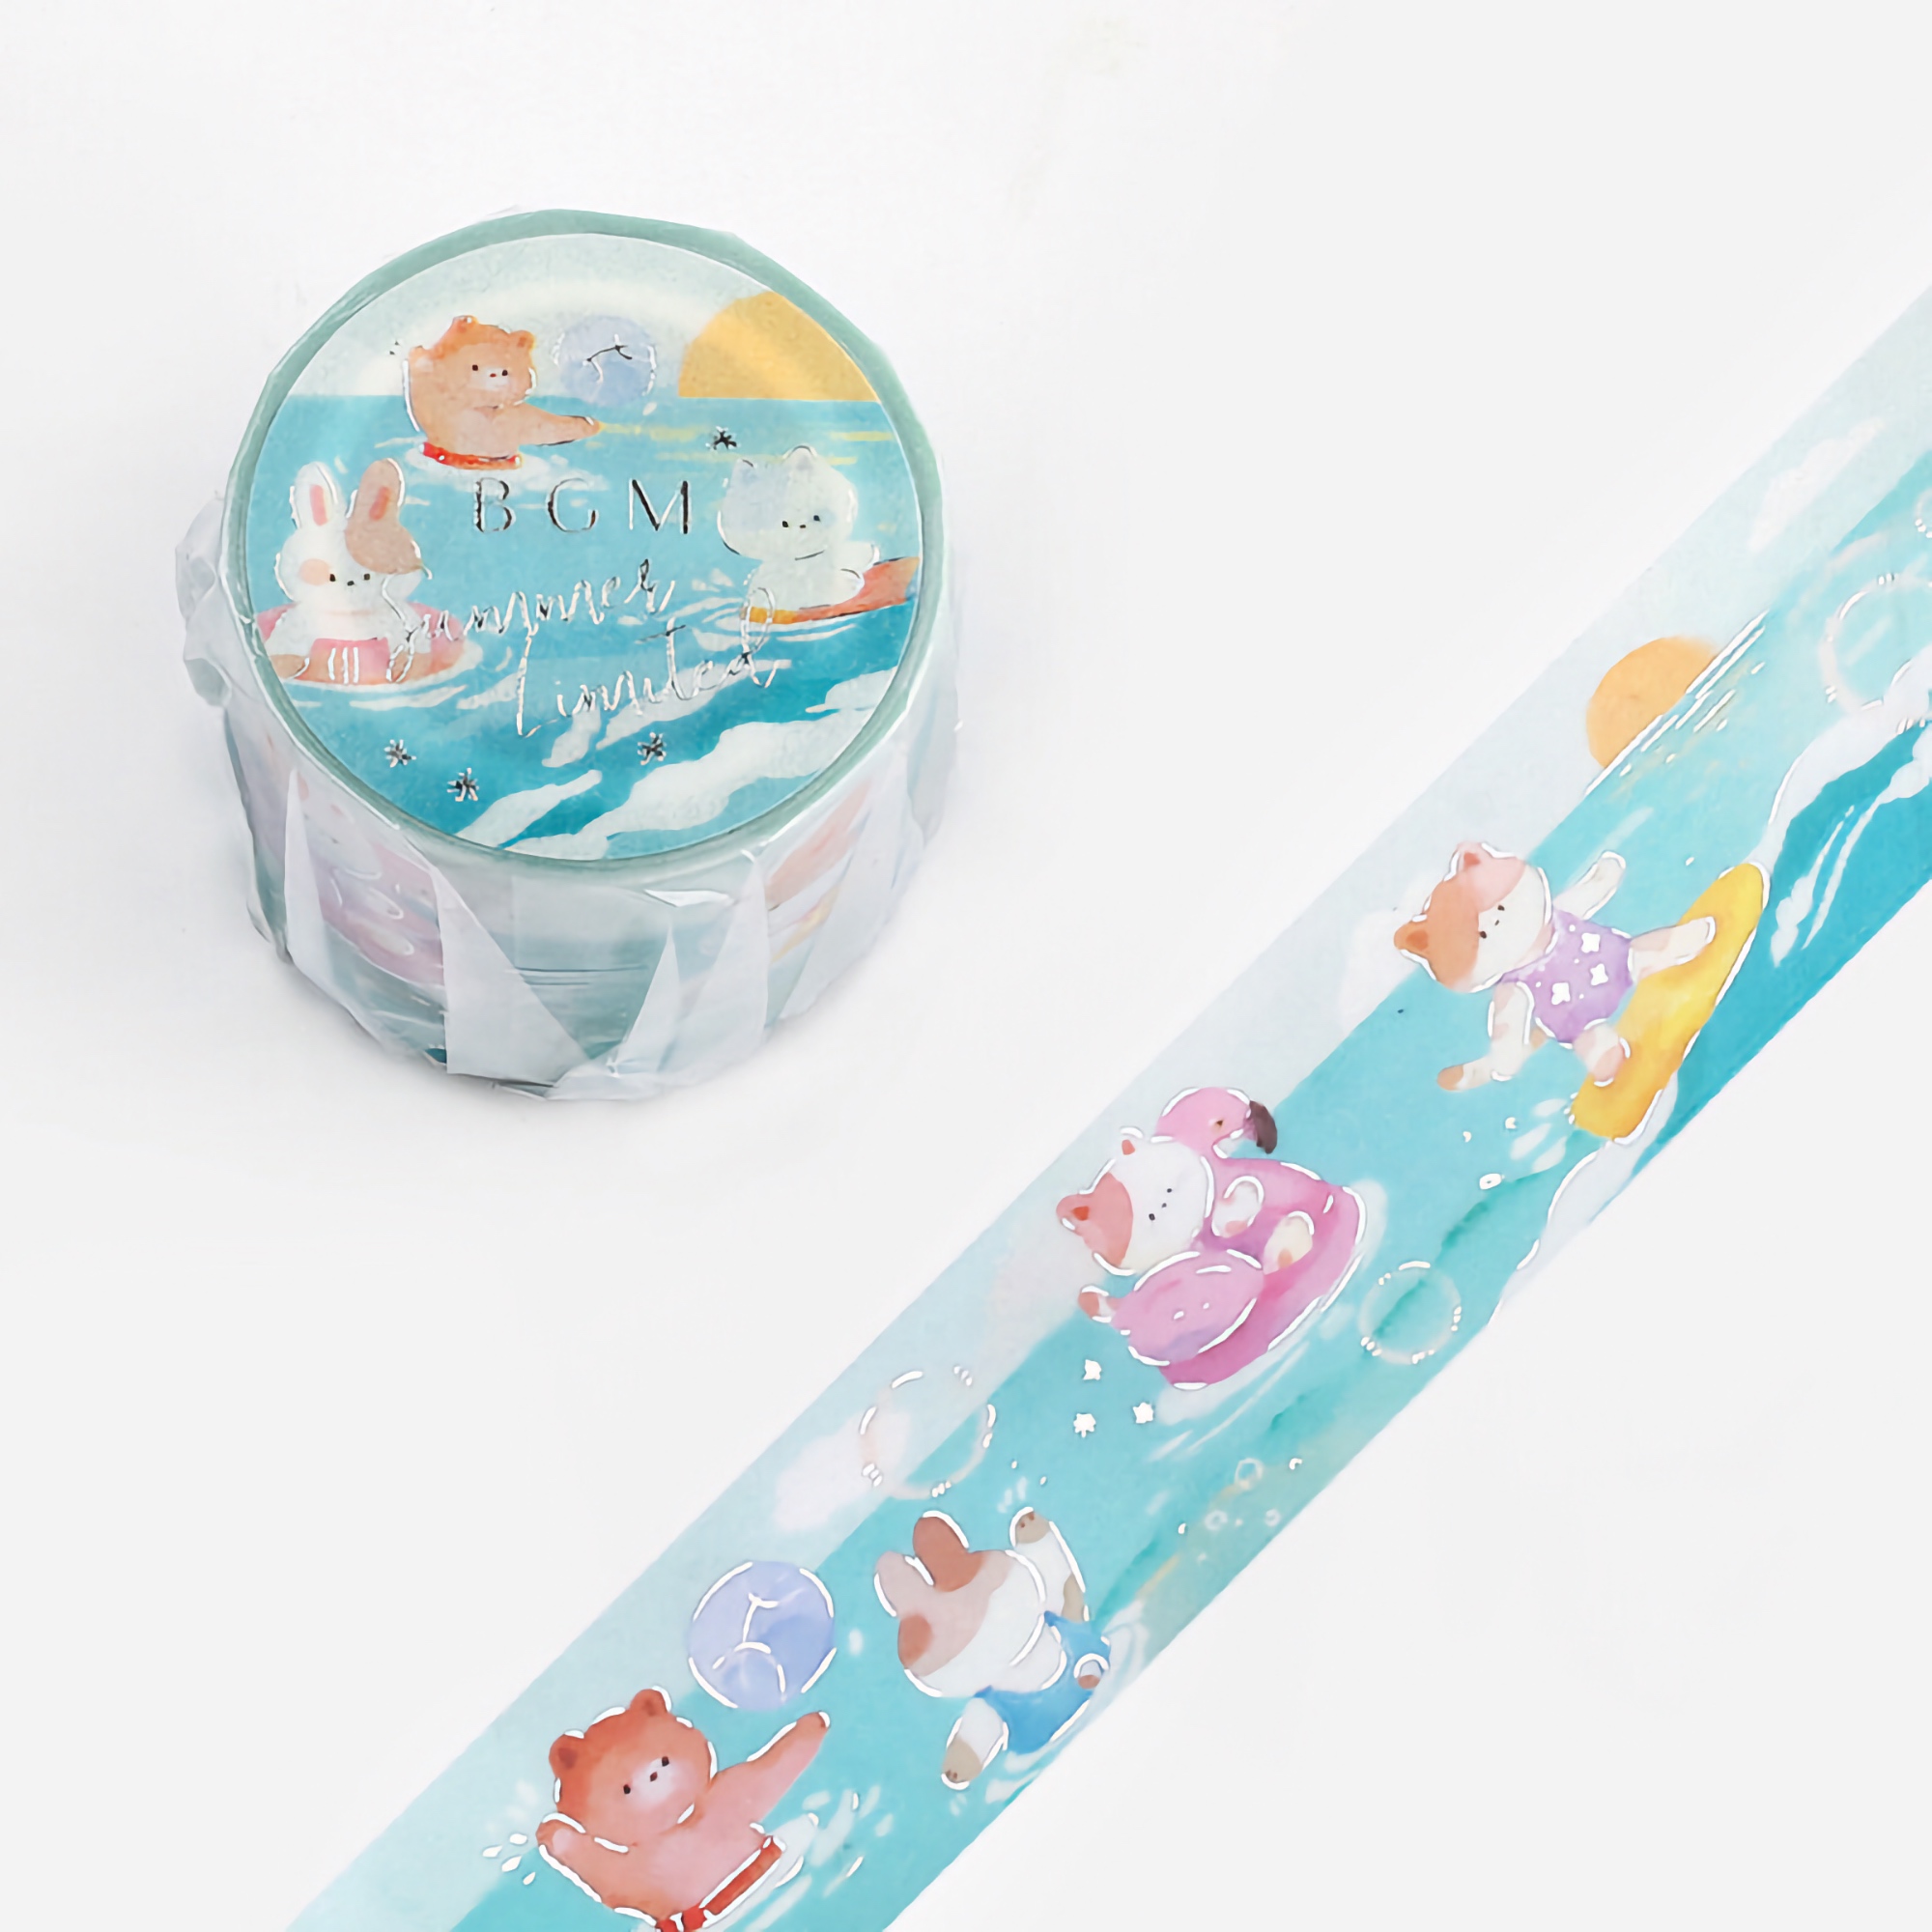 BGM Washi Tape Silver Foil Summer Limited Edition Playing in the Ocean 30 mm